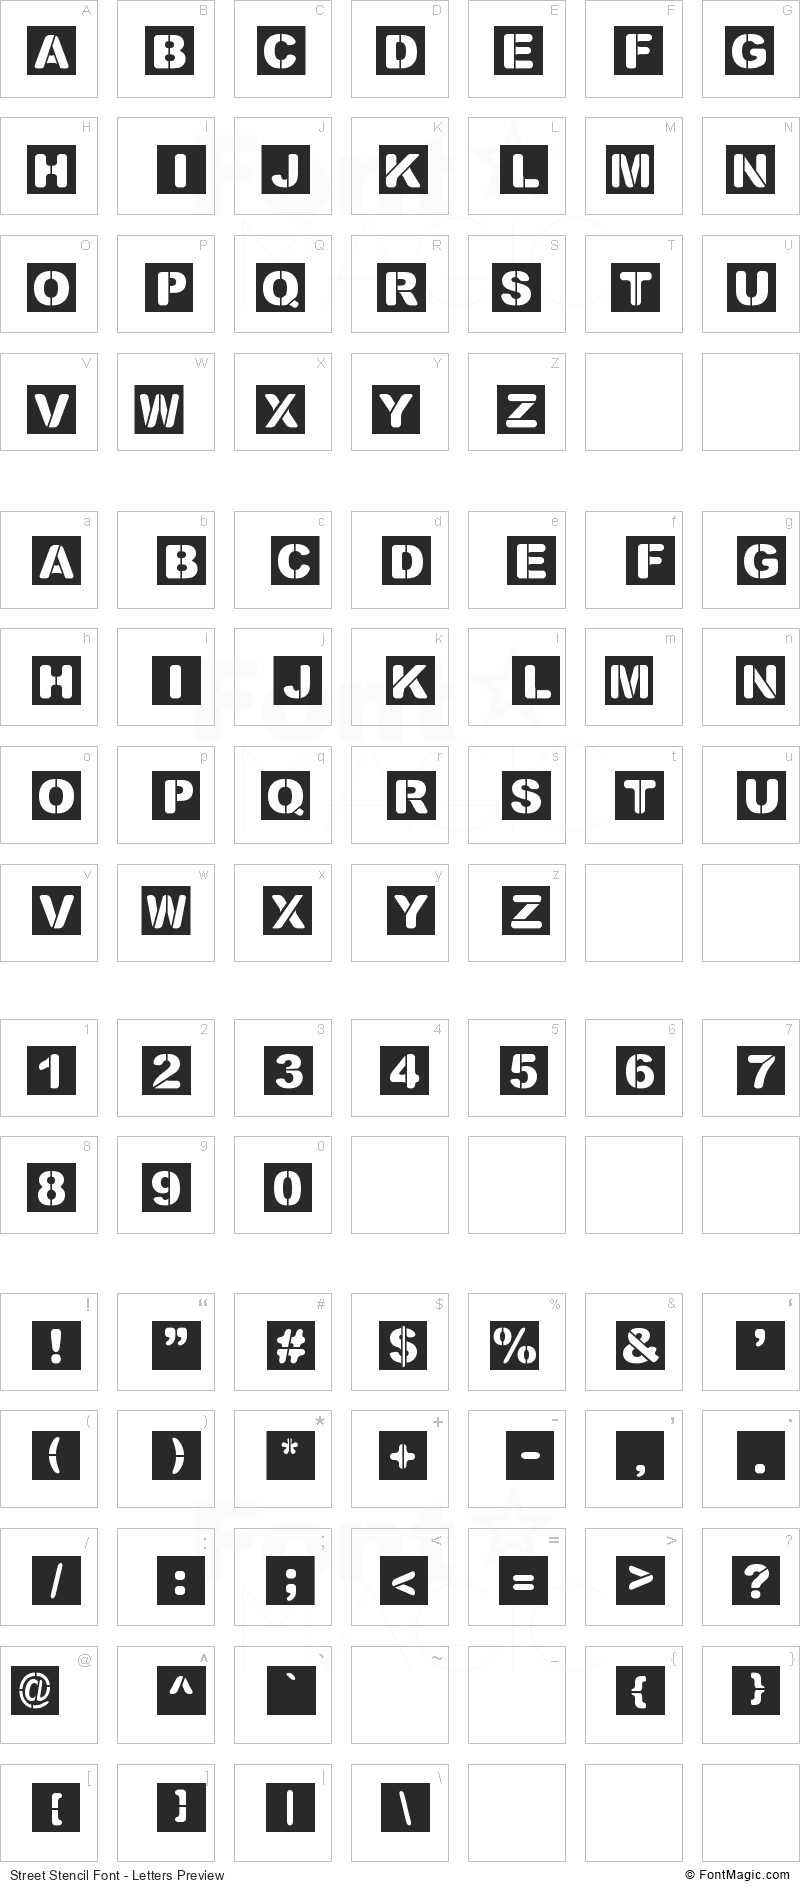 Street Stencil Font - All Latters Preview Chart